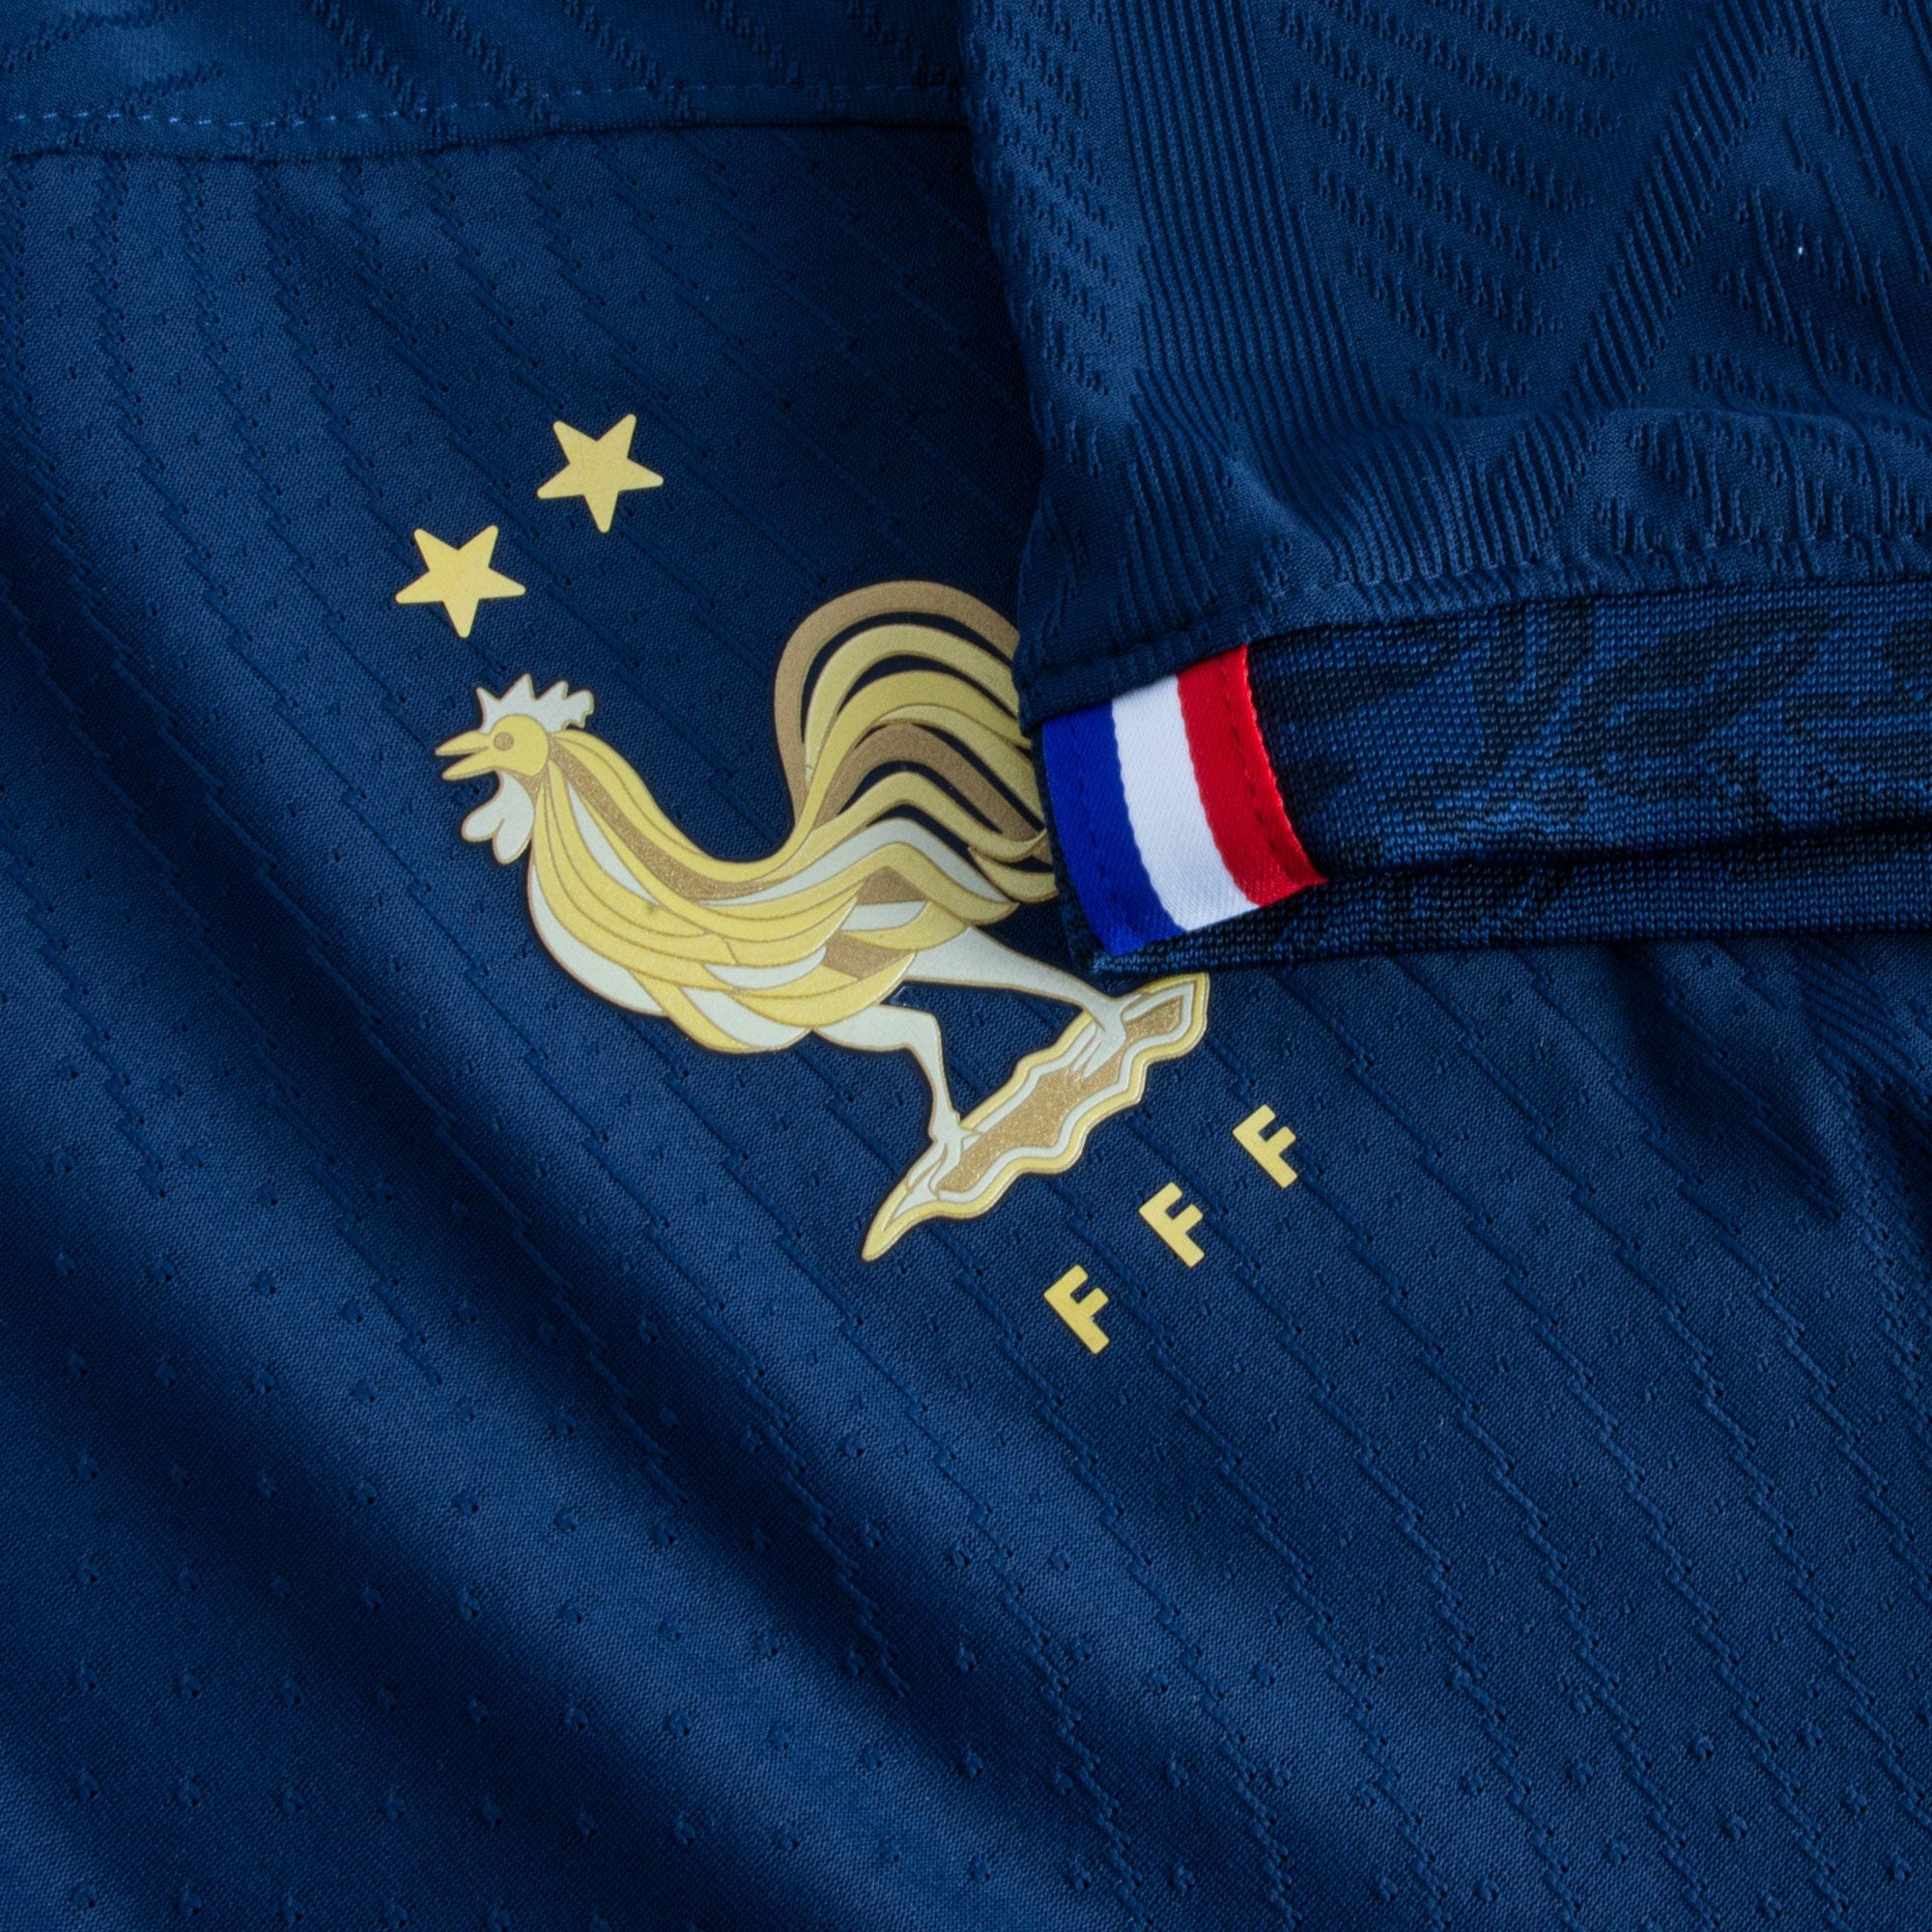 France Home Jersey 22/23